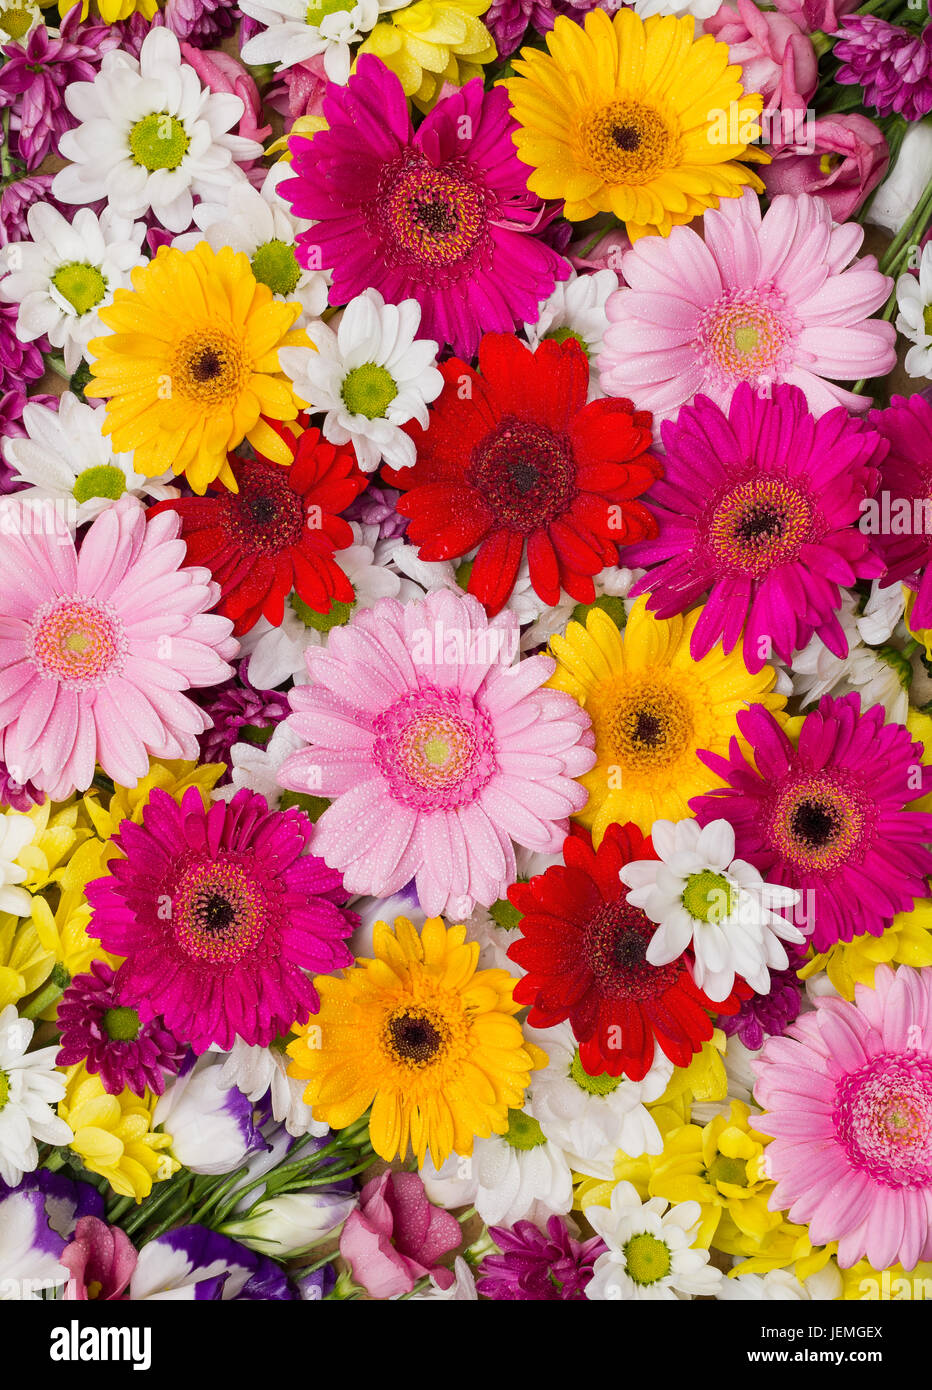 Gerbera and other different flowers arranged as a colorful natural  background image with white, yellow, red and pink blossoms - flat lay  photography Stock Photo - Alamy